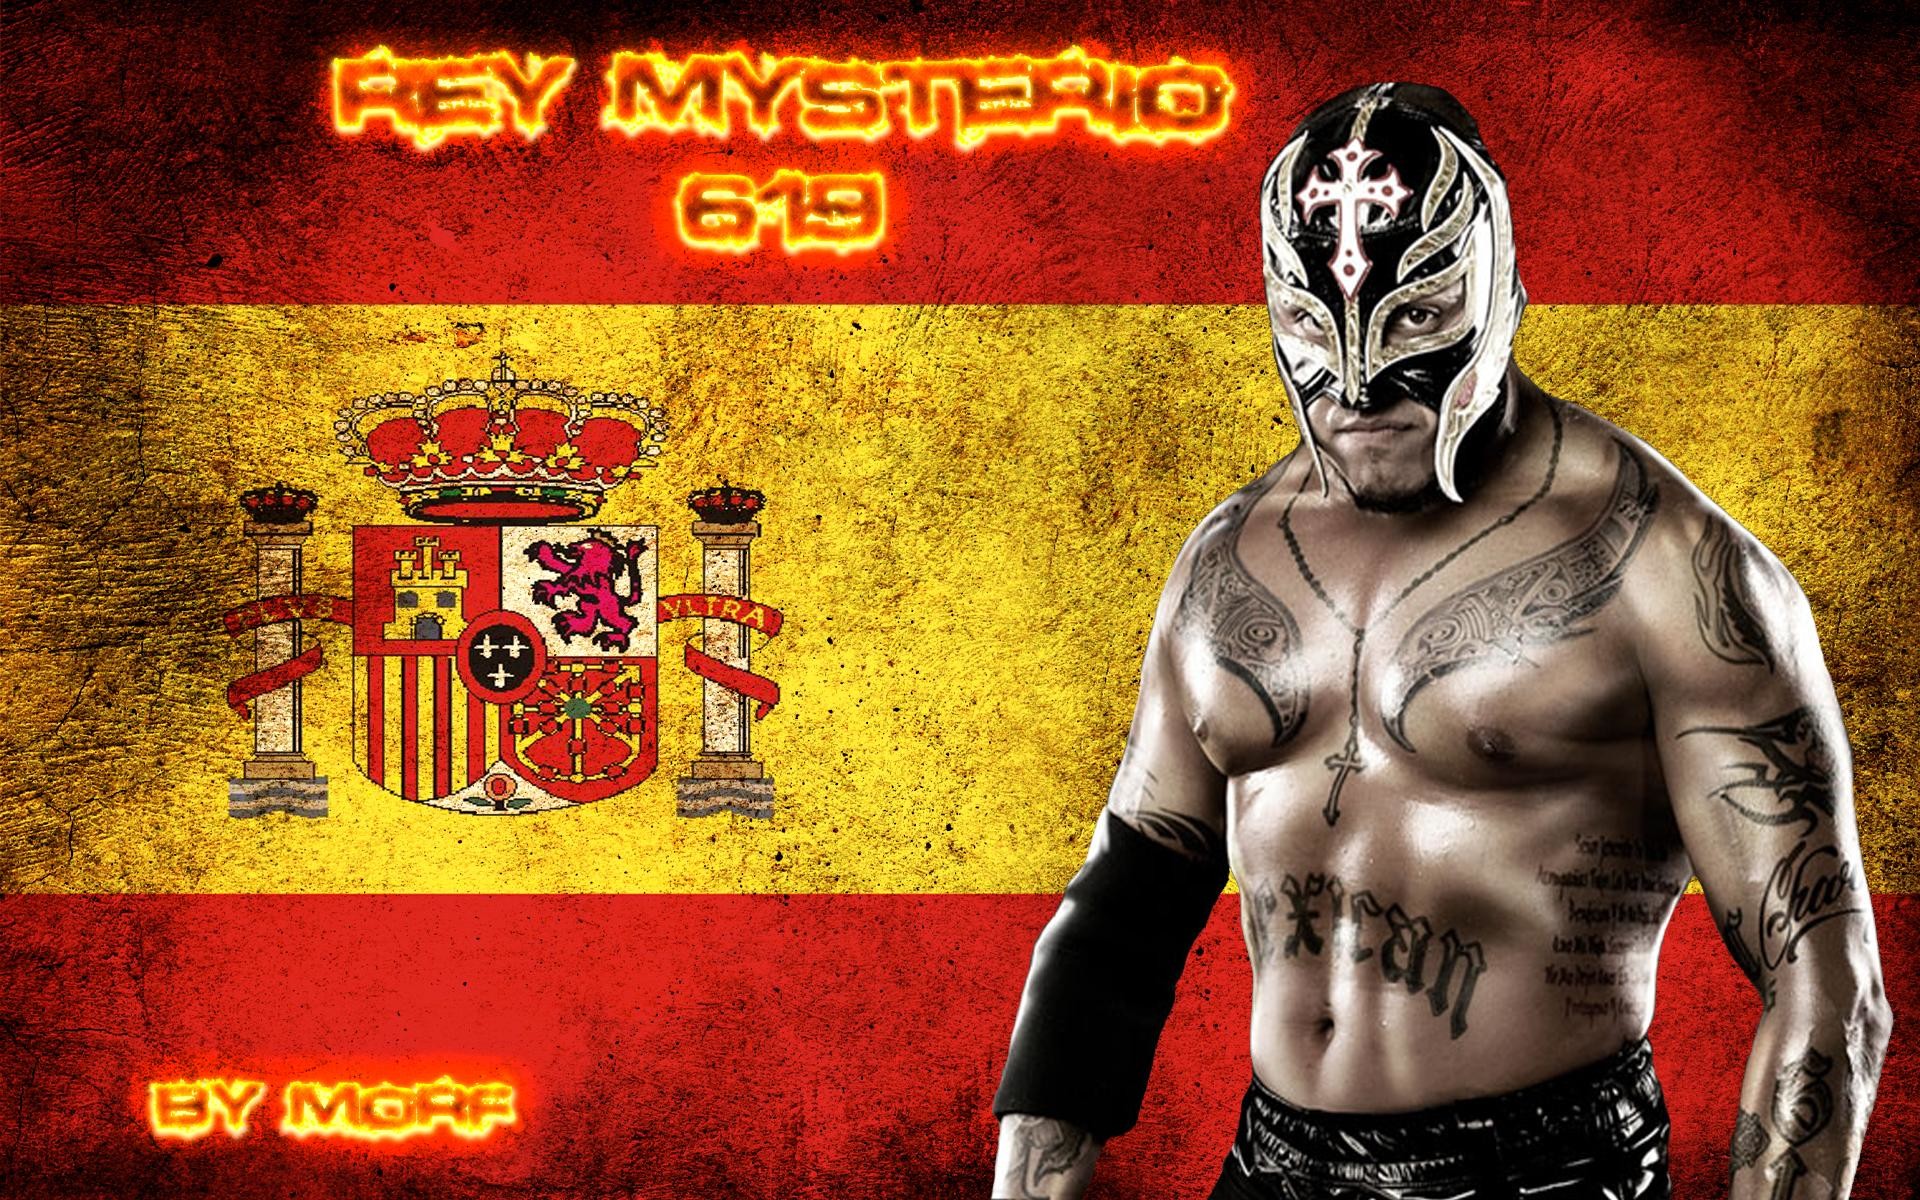 1920x1200 WWE images Rey Mysterio Wallpaper HD wallpaper and background photos .